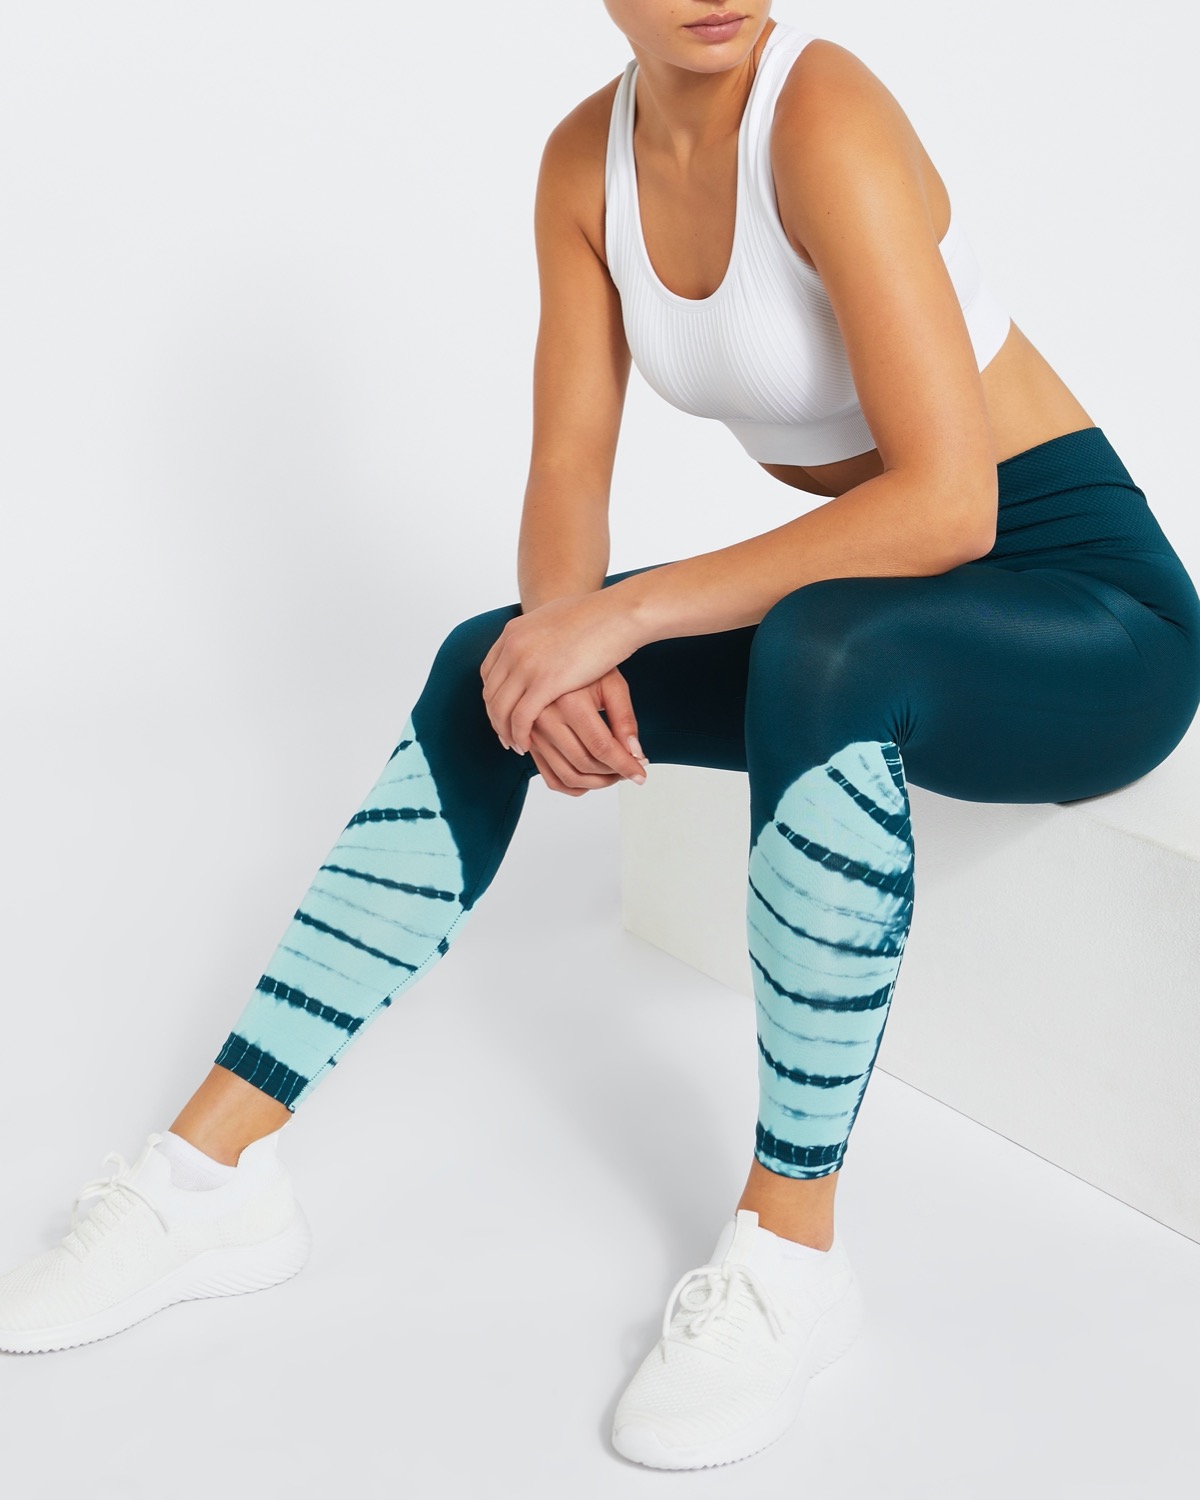 Dunnes Stores fans set for frenzy over new tie-dye seamless leggings and  they cost just €15